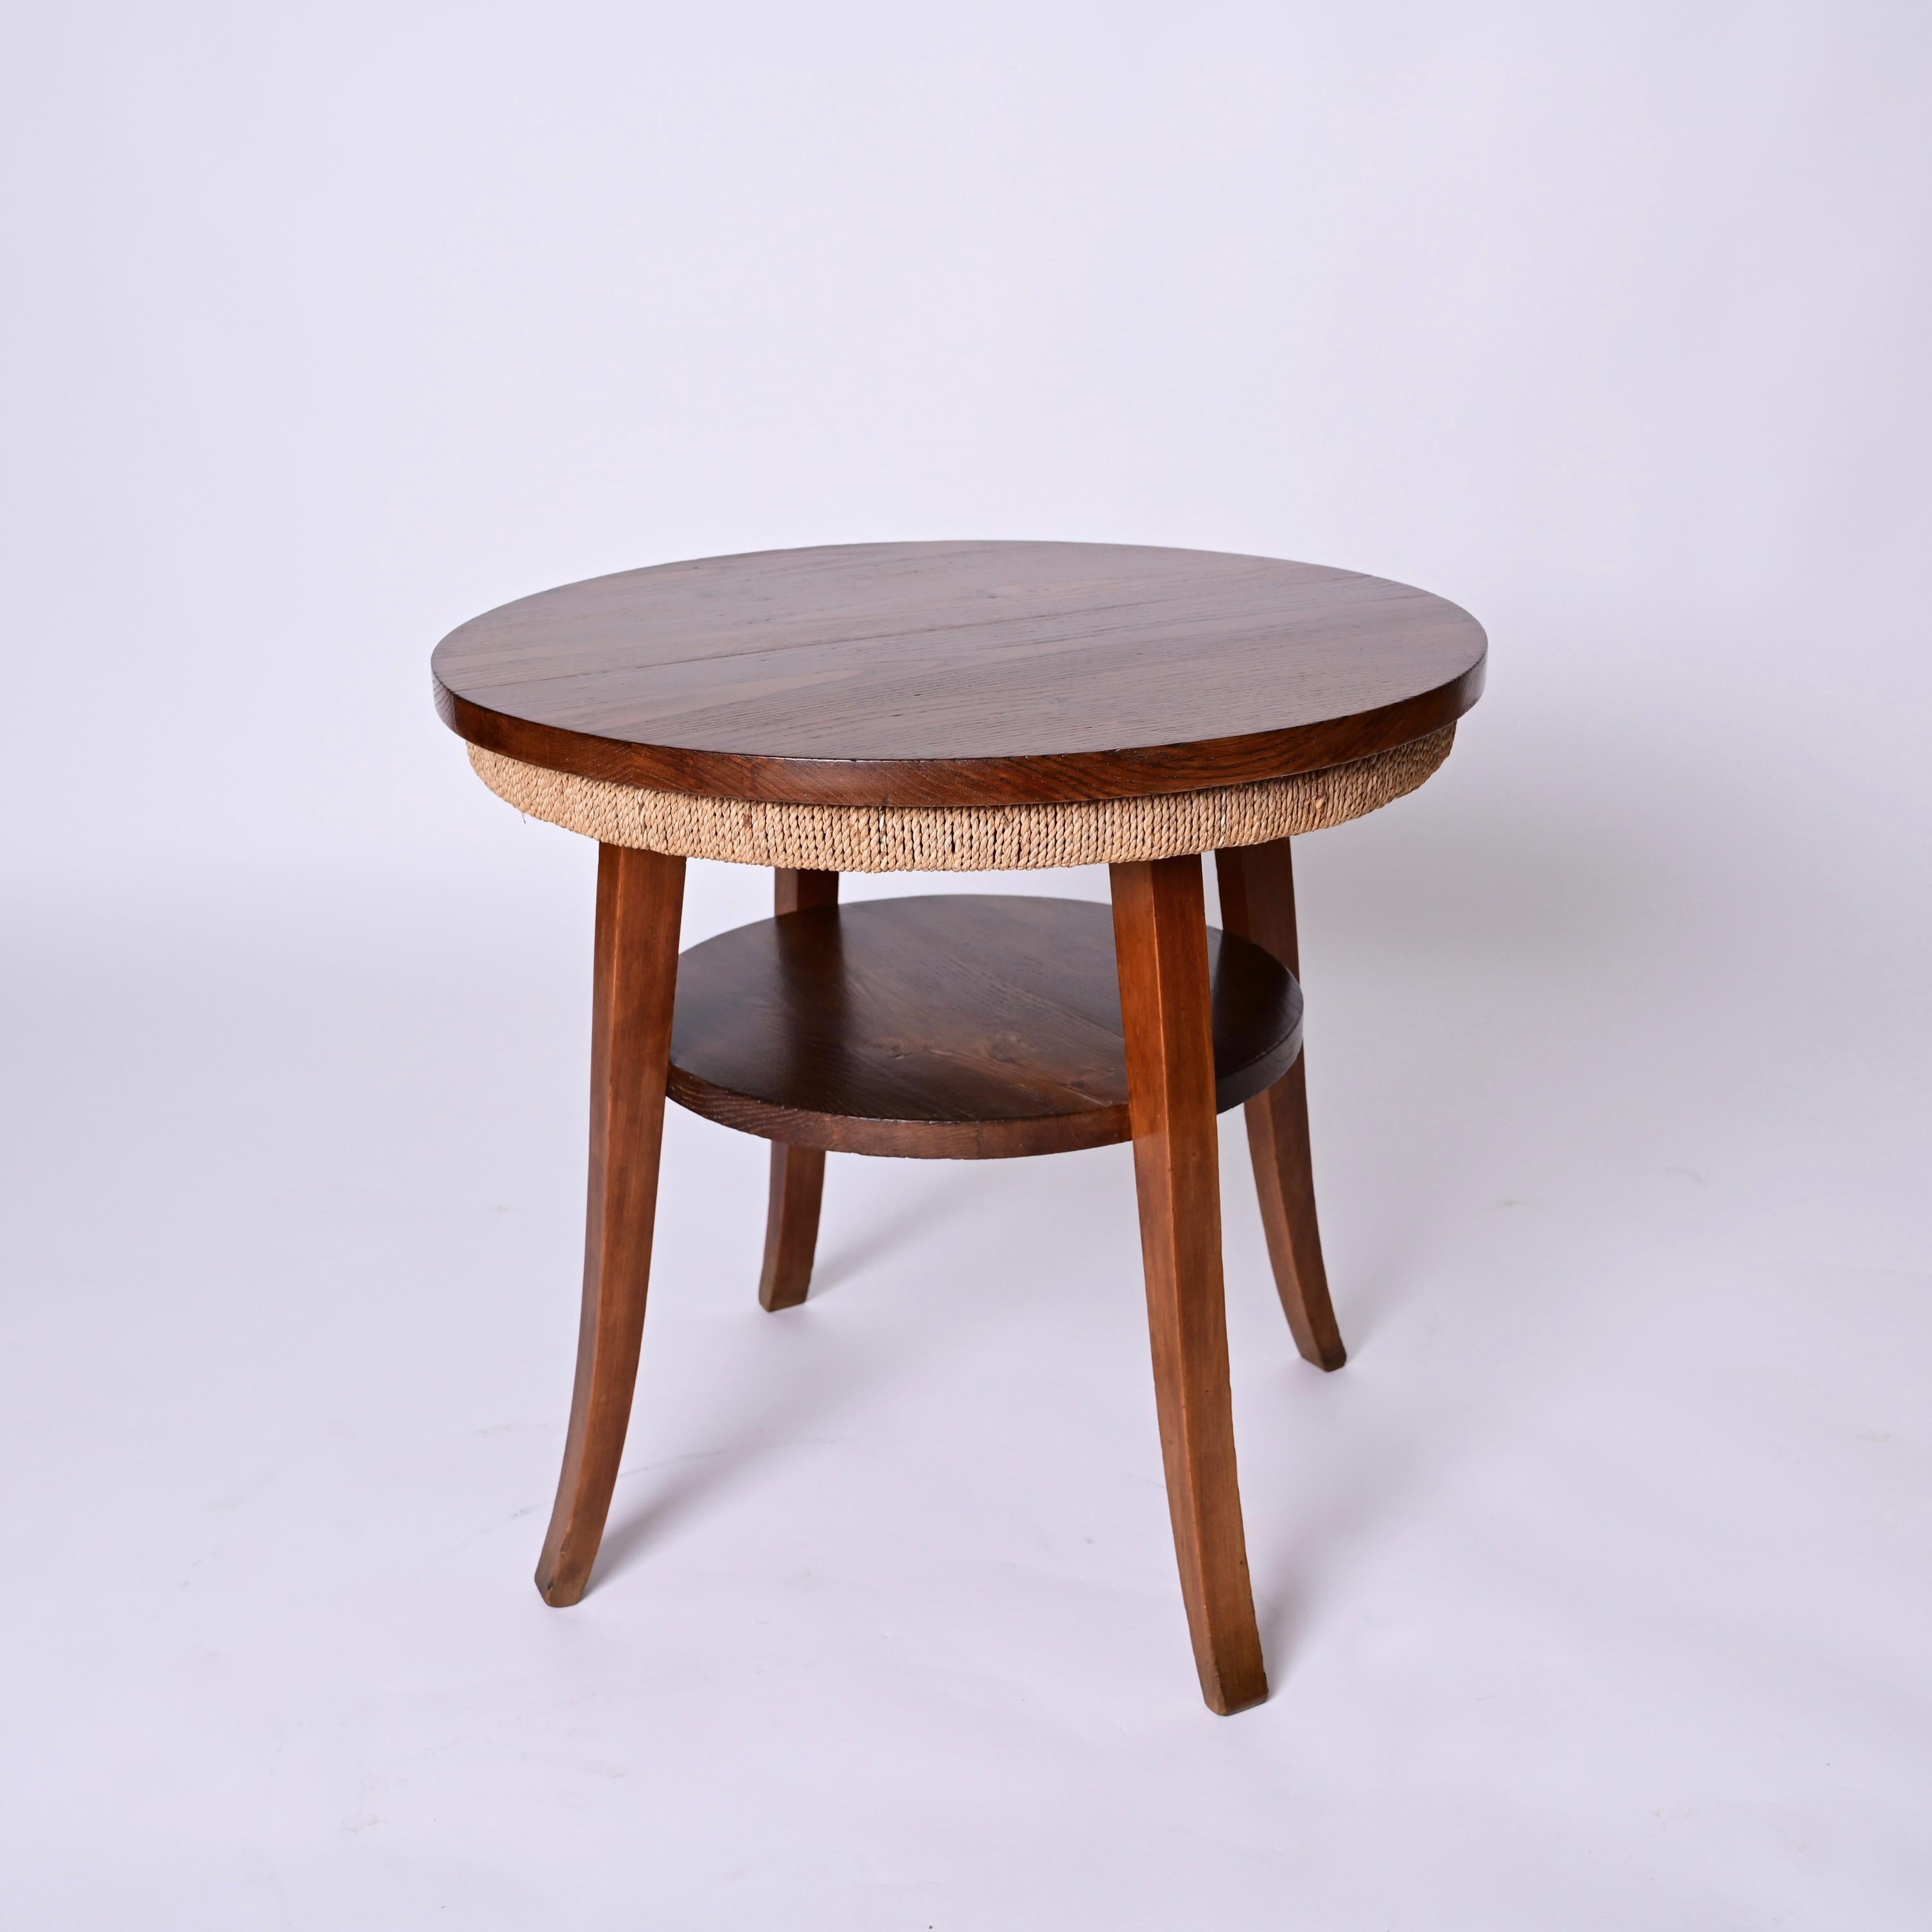 Midcentury Two-Tier Round Rope and Chestnut Wood Italian Coffee Table, 1950s For Sale 8